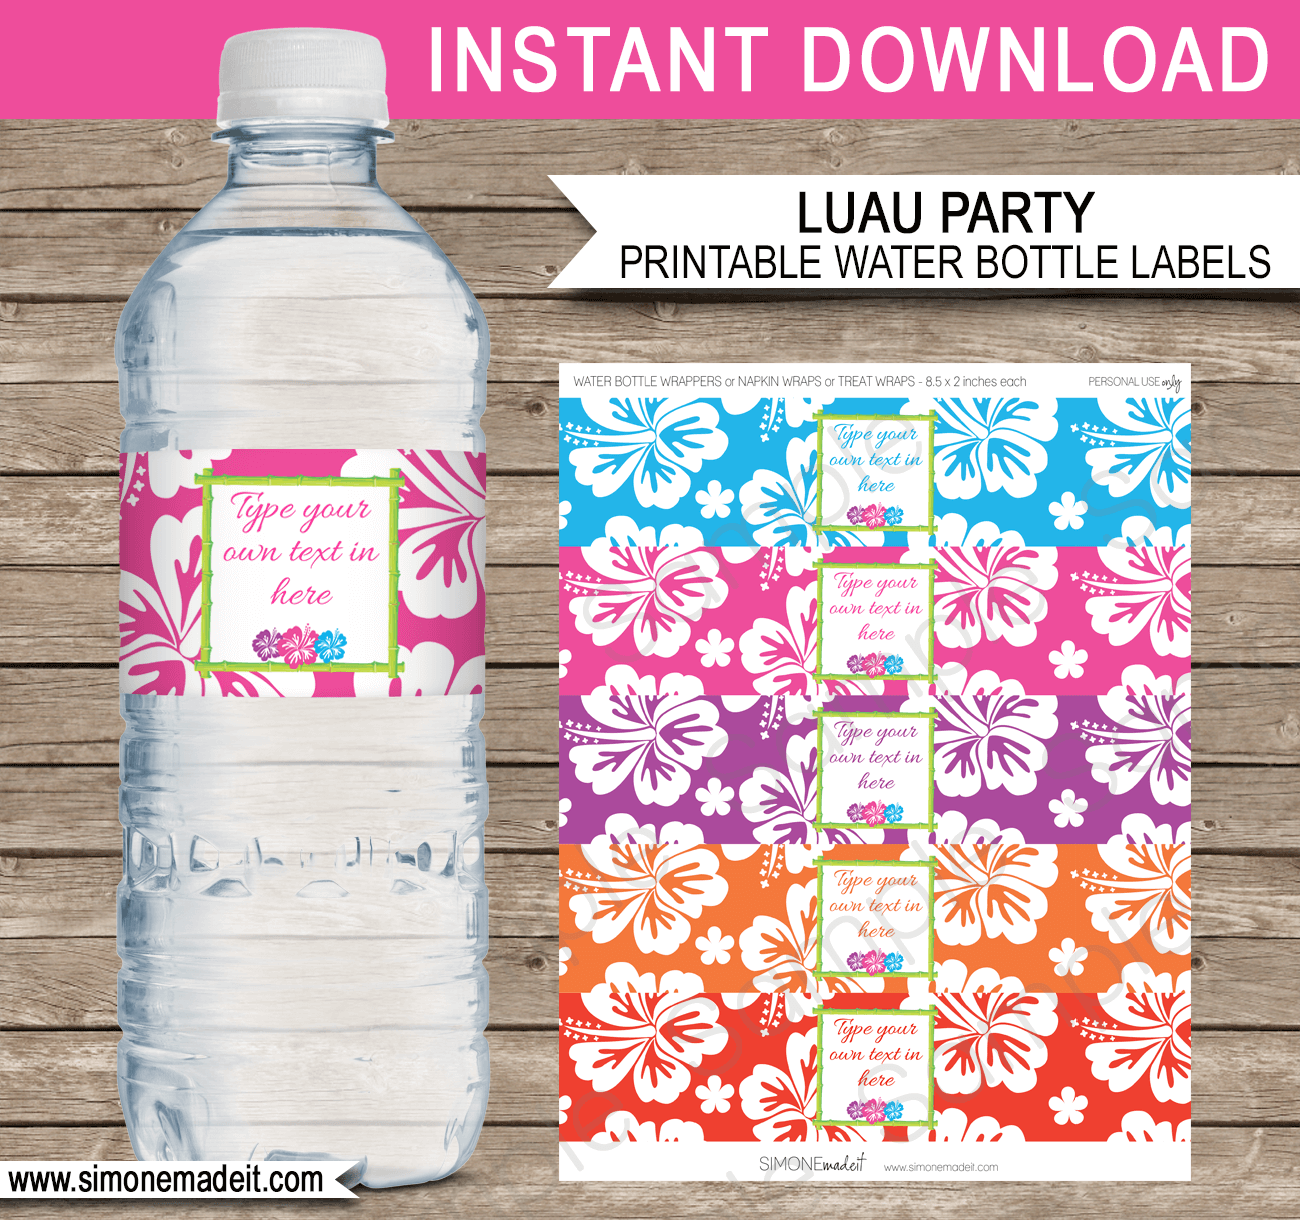 luau-water-bottle-labels-free-printable-printable-form-templates-and